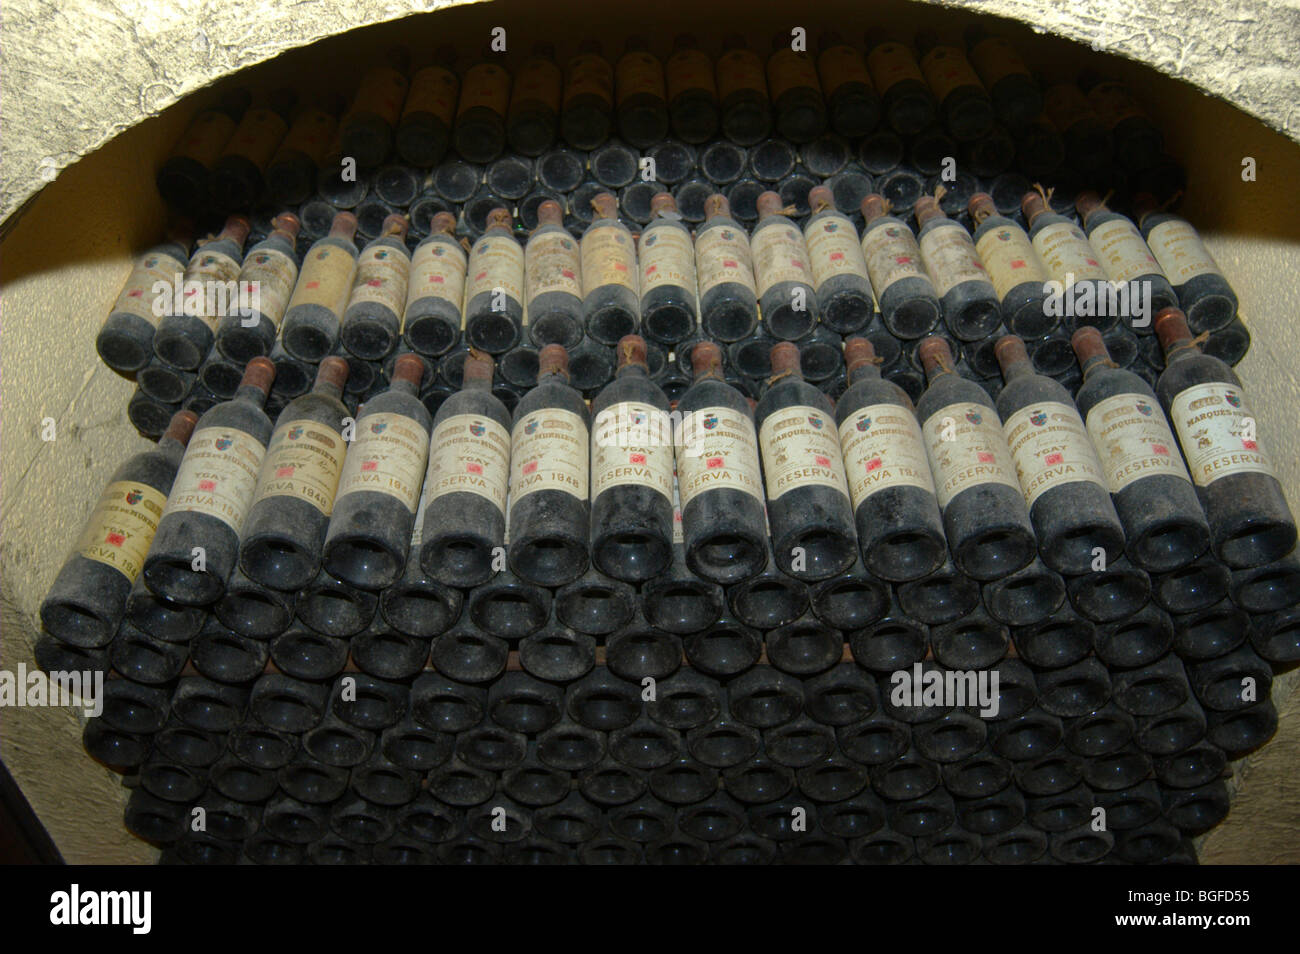 Stacks of vintage Rioja bottles ageing in a wine cellar in Spain. Stock Photo